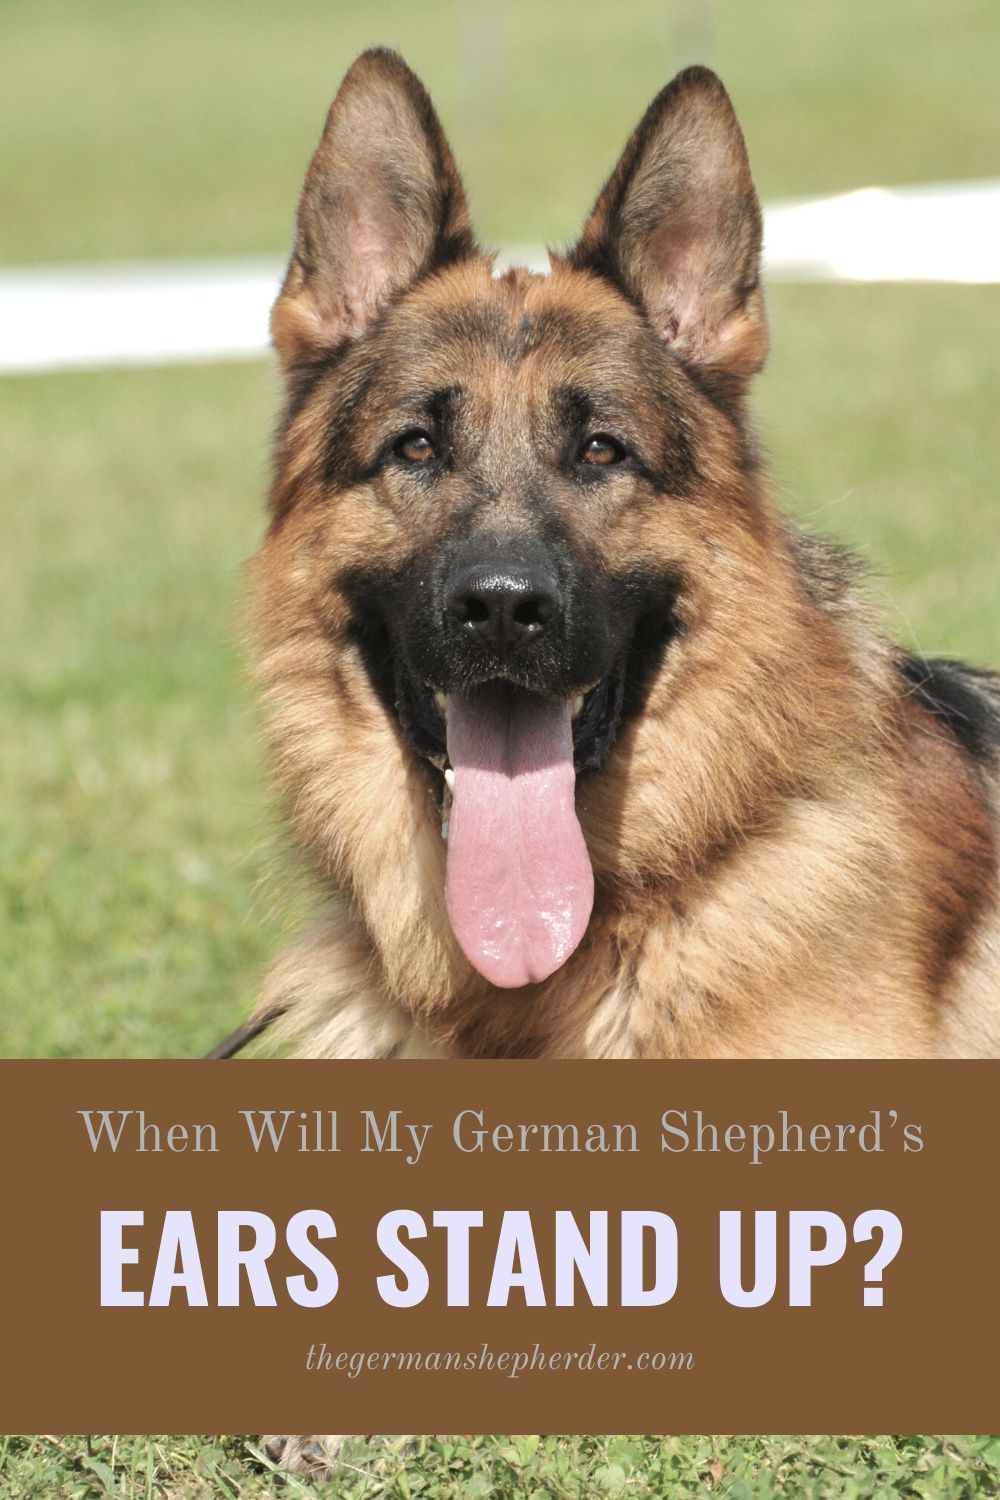 When Does A German Shepherd Ears Stand Up